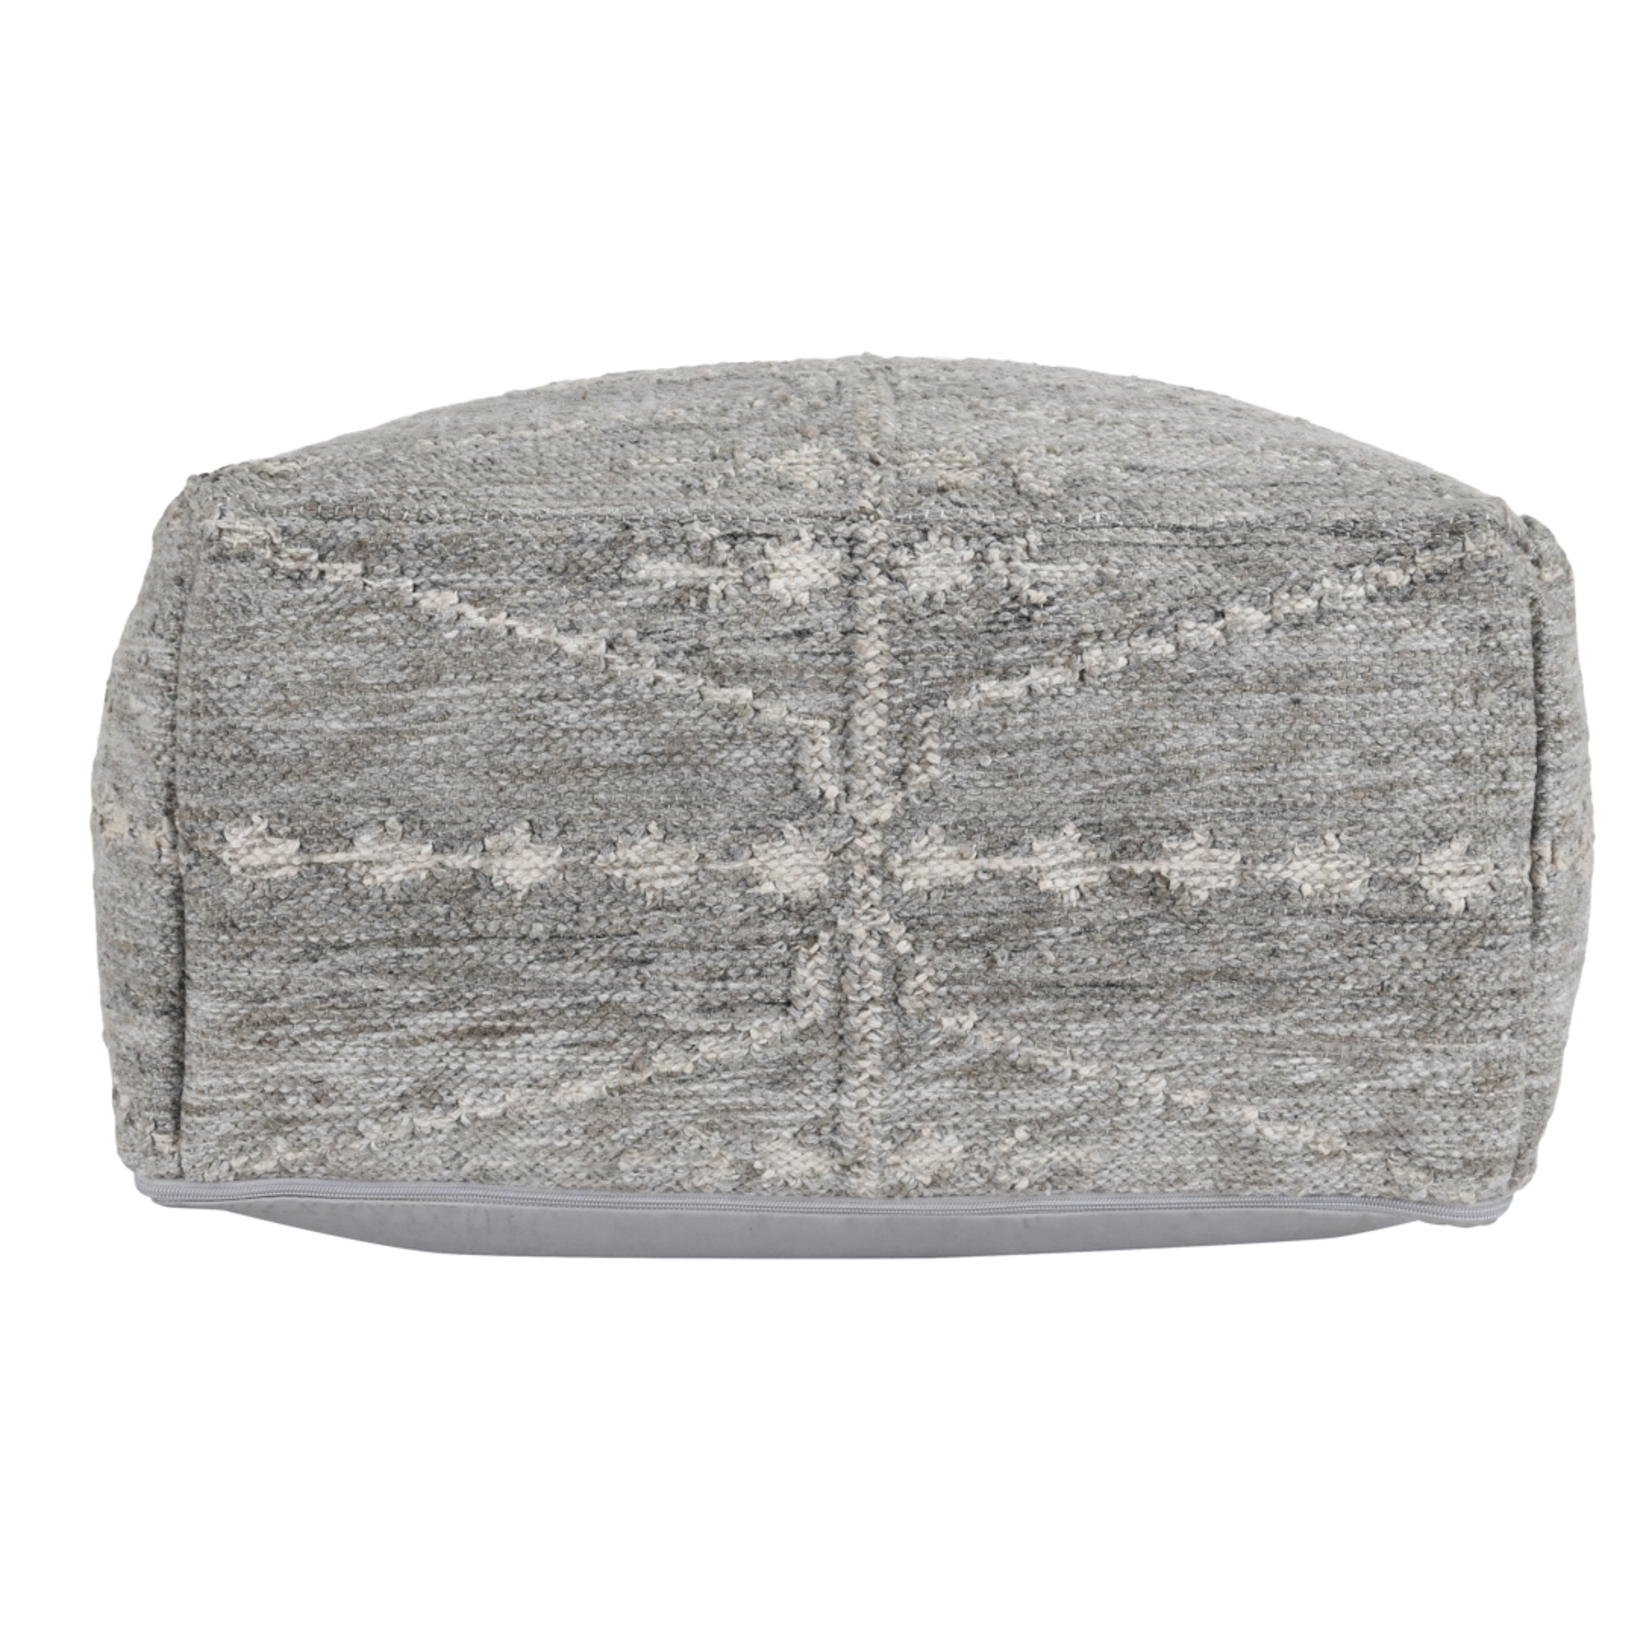 Outside The Box 24x12 Oasis Gray Handwoven Performance Fabric Pouf